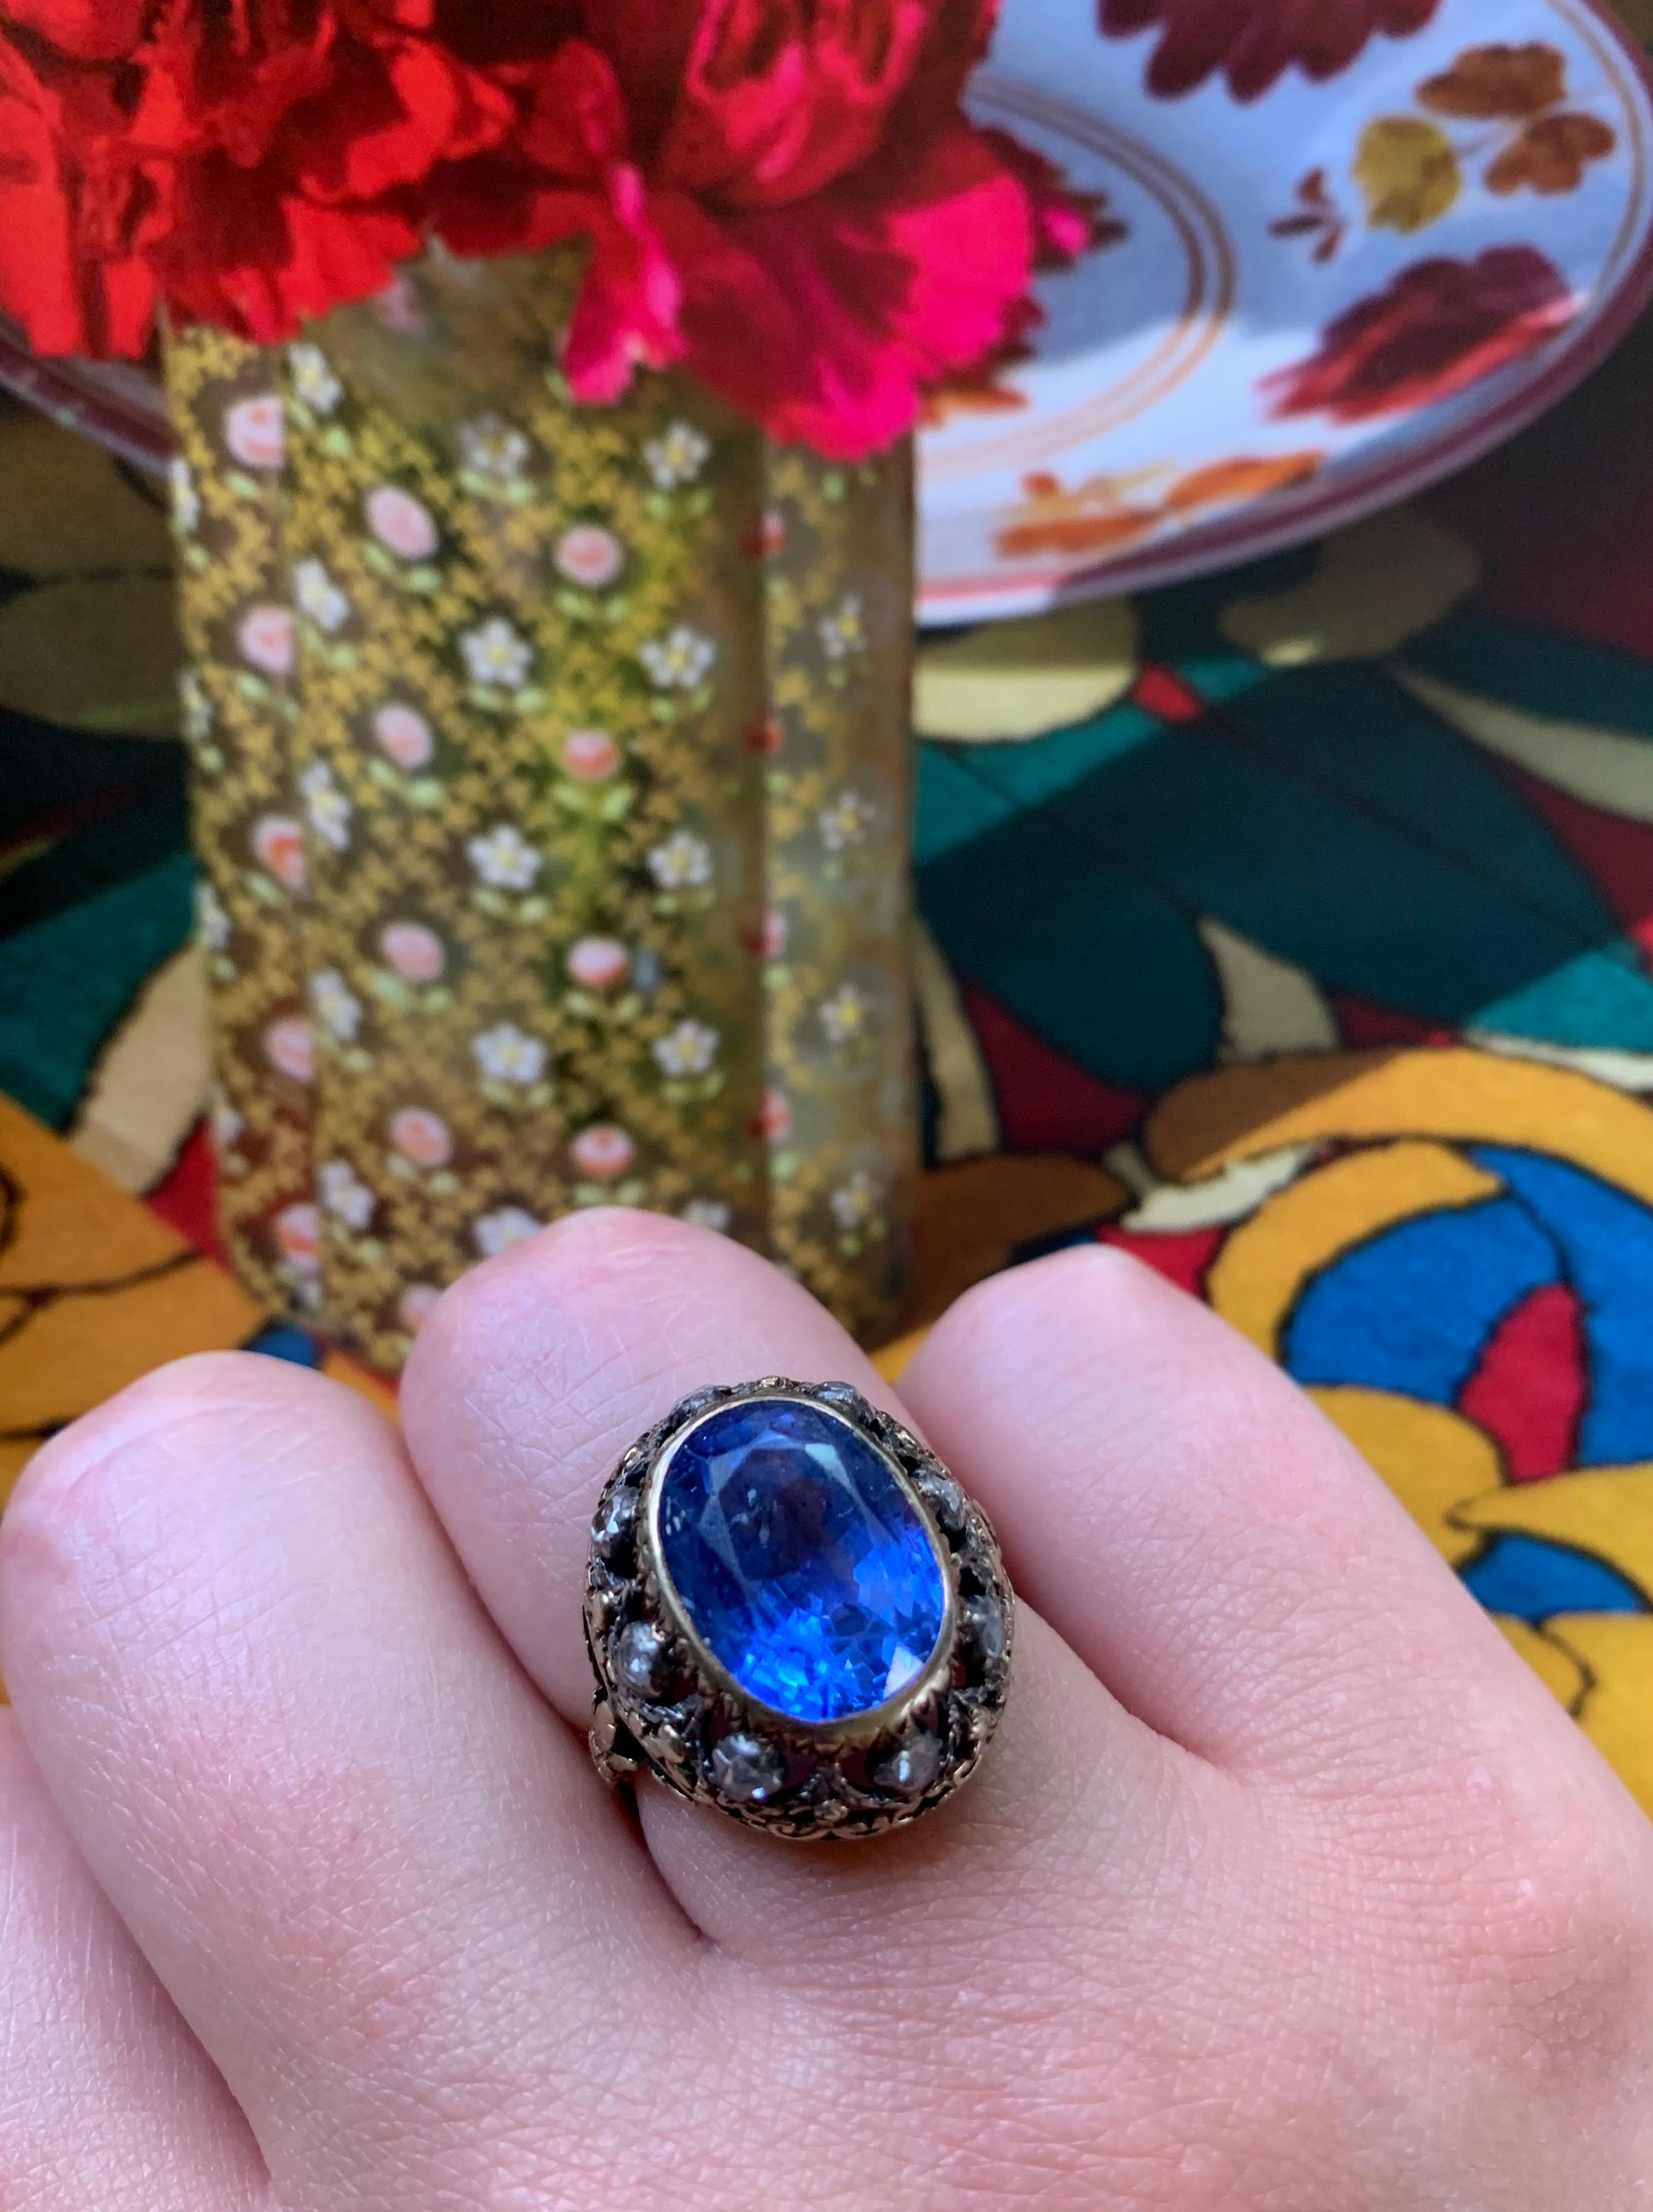 Exceptional natural color change sapphire and rose cut diamond Georgian Period ring.
The sapphire of Sri Lankan origin, lively blue color changing to violet, approximately 8 carat, measuring 12.63 x 9.08 x 7.52mm, surrounded by eight near colorless